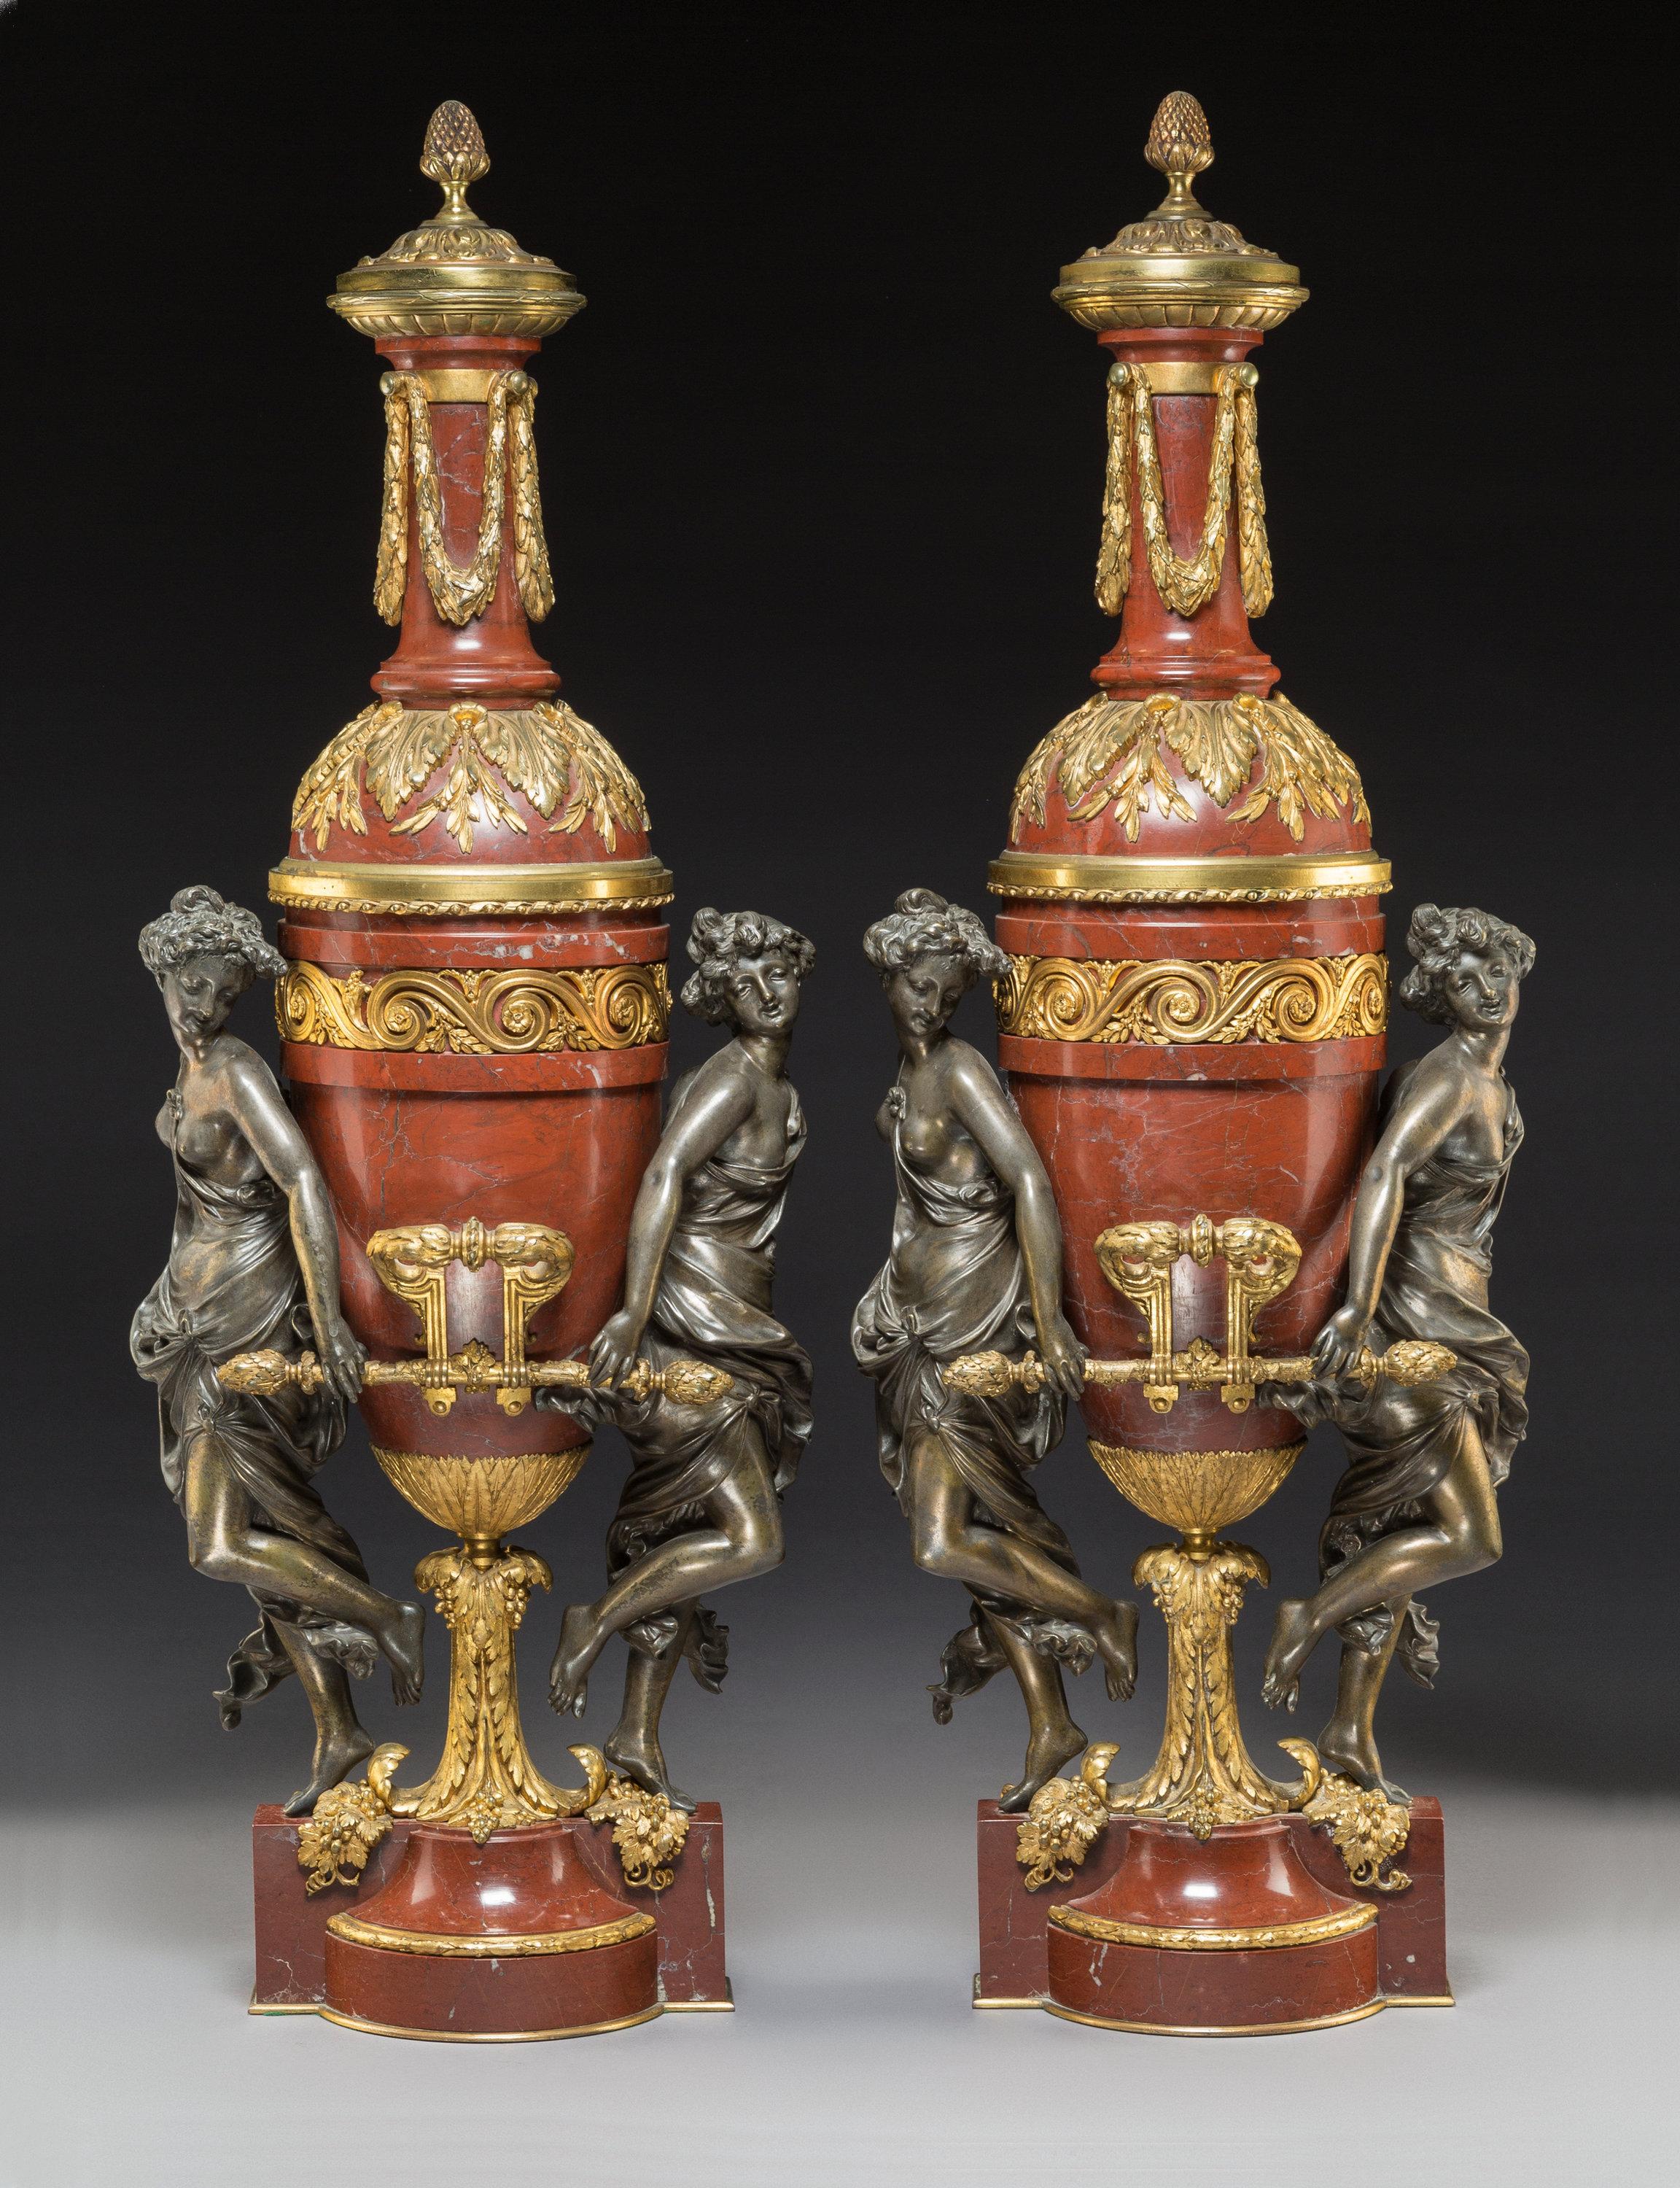 French Ormolu and Patinated Bronze-Mounted Marble Vases with Covers by Gagneau For Sale 3